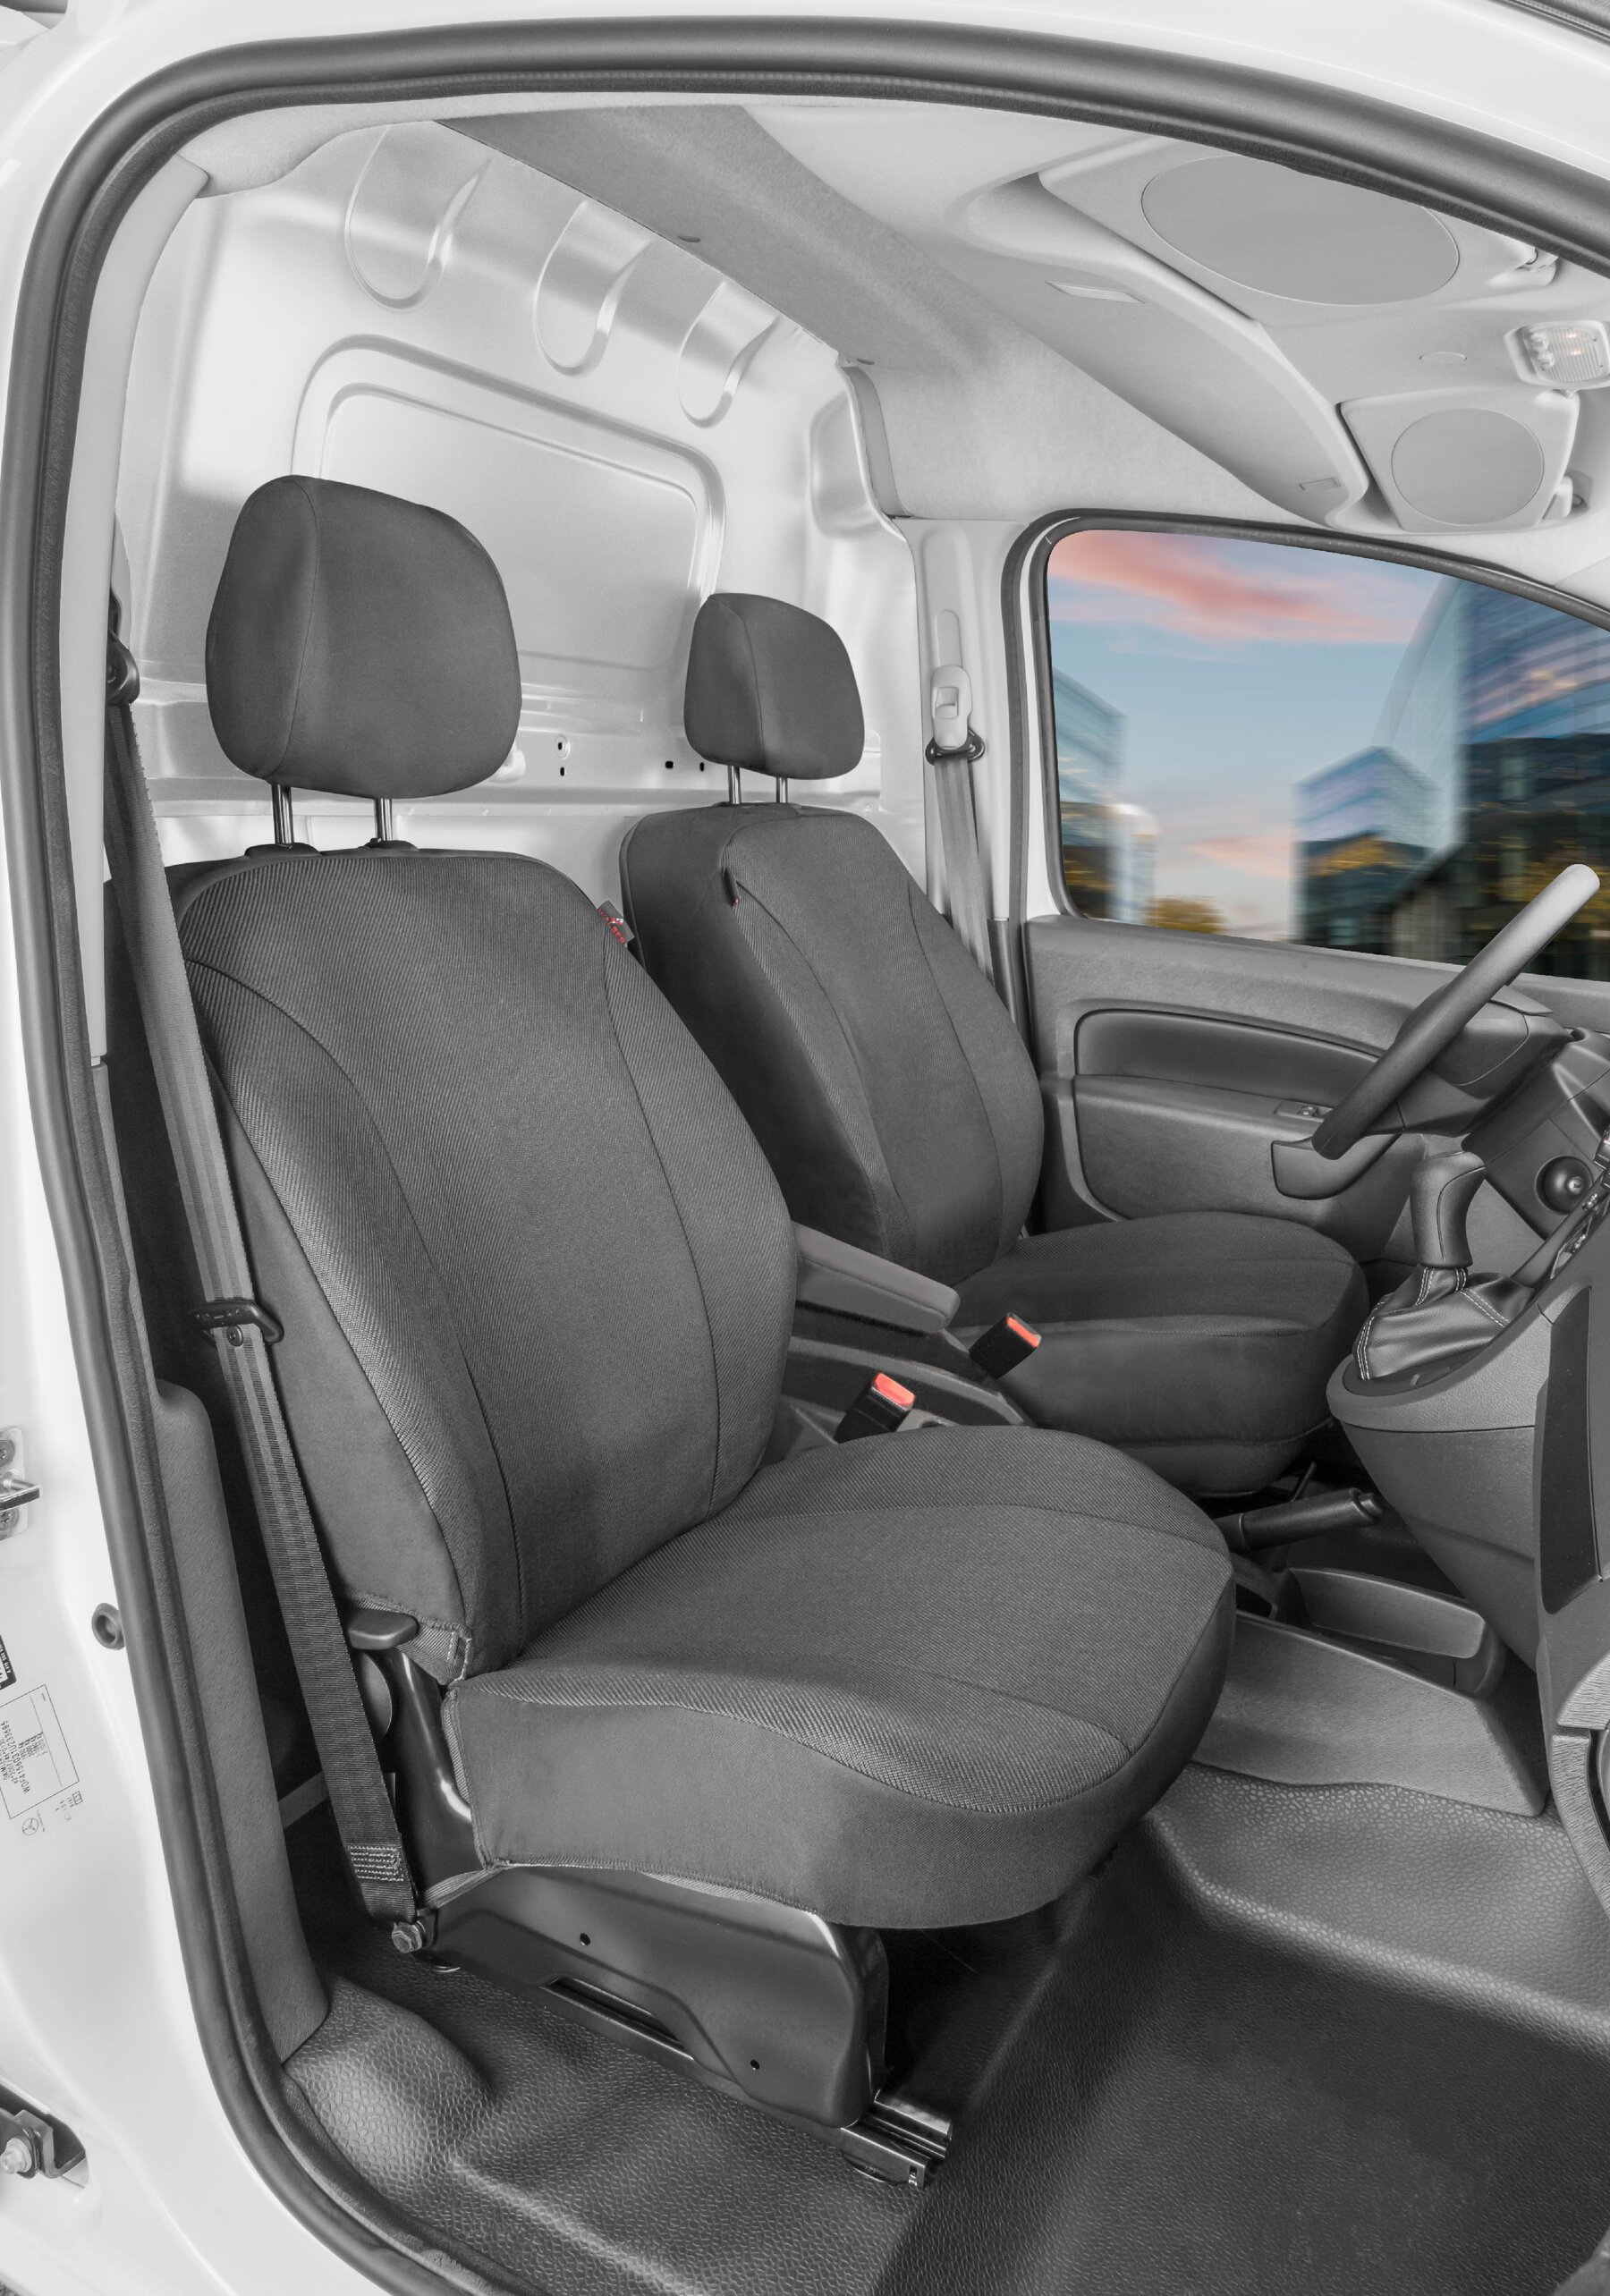 Seat cover made of fabric for Ford Transit Courier 2, 2 single seat covers front